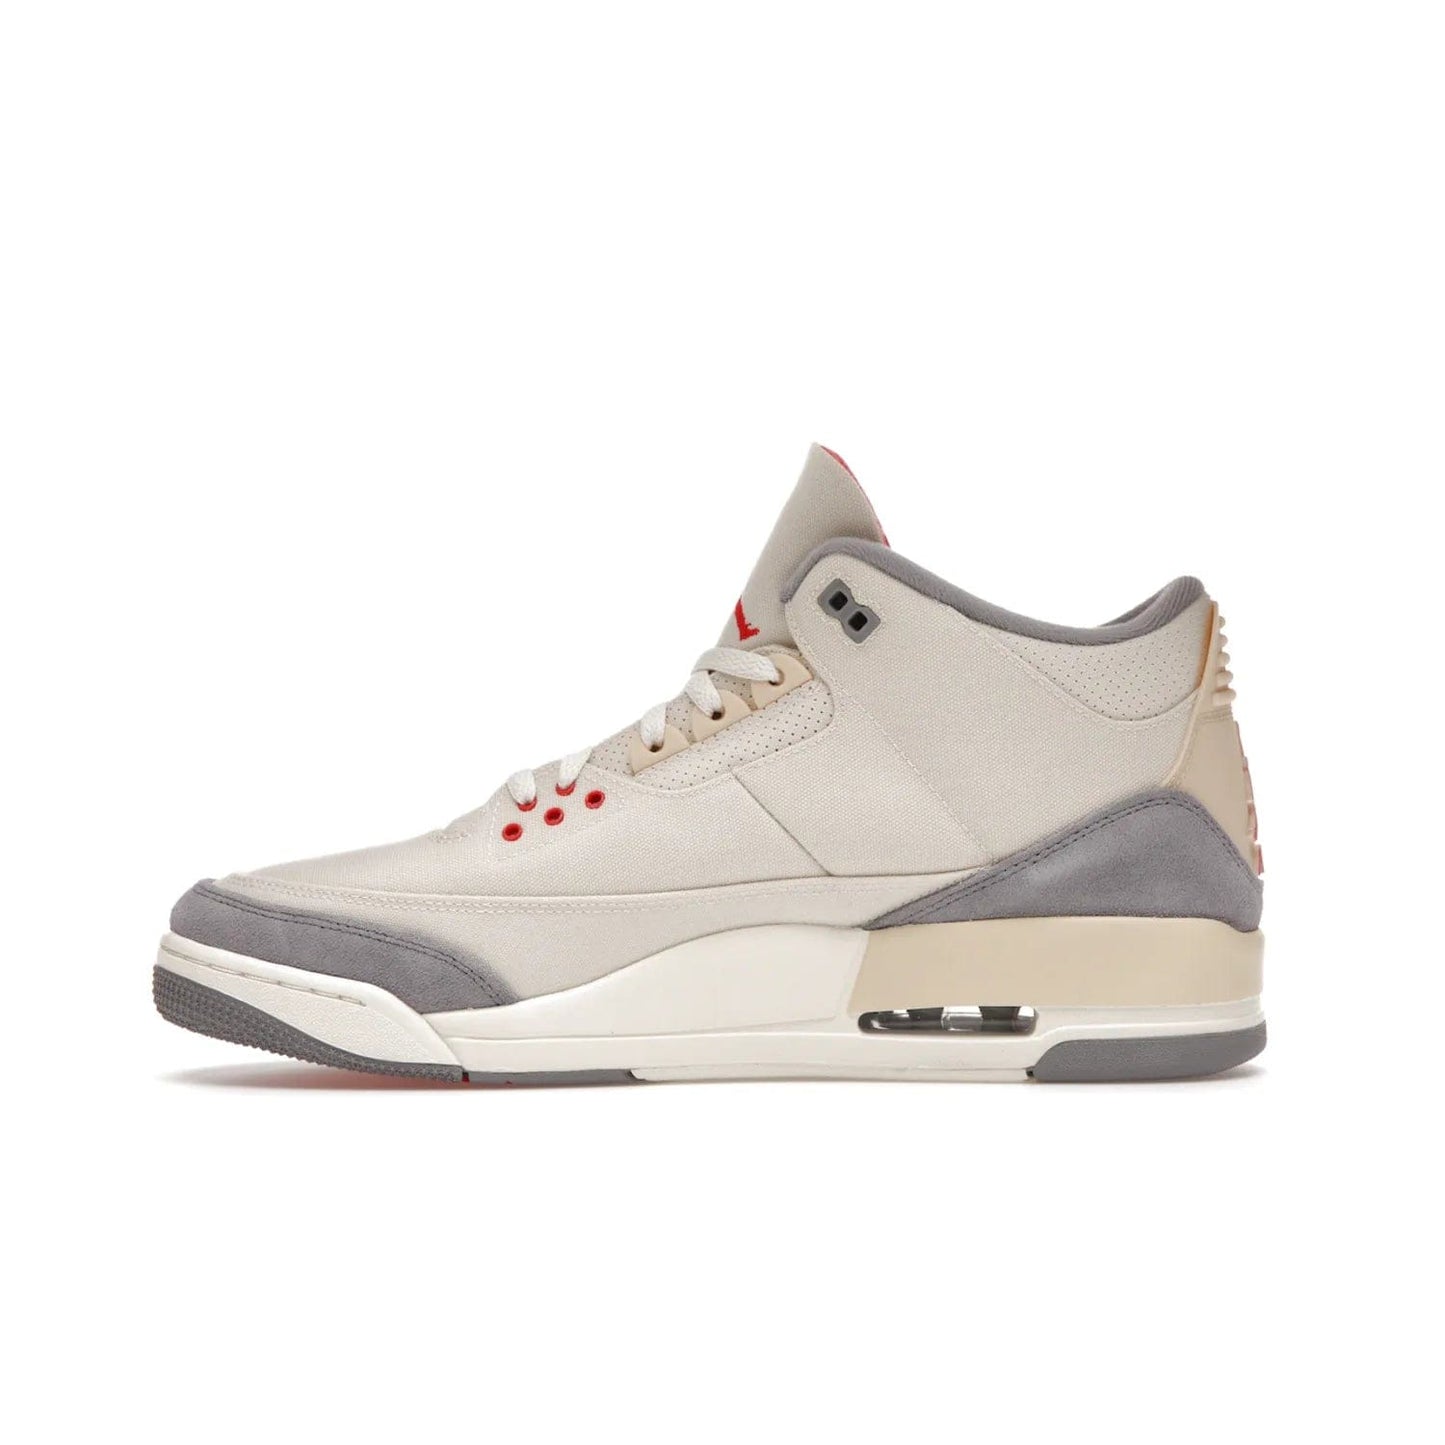 Jordan 3 Retro Muslin - Image 19 - Only at www.BallersClubKickz.com - Eye-catching Air Jordan 3 Retro Muslin in a neutral palette of grey, cream, and red. Featuring canvas upper, suede overlays and white/grey Air Max sole. Available in March 2022.